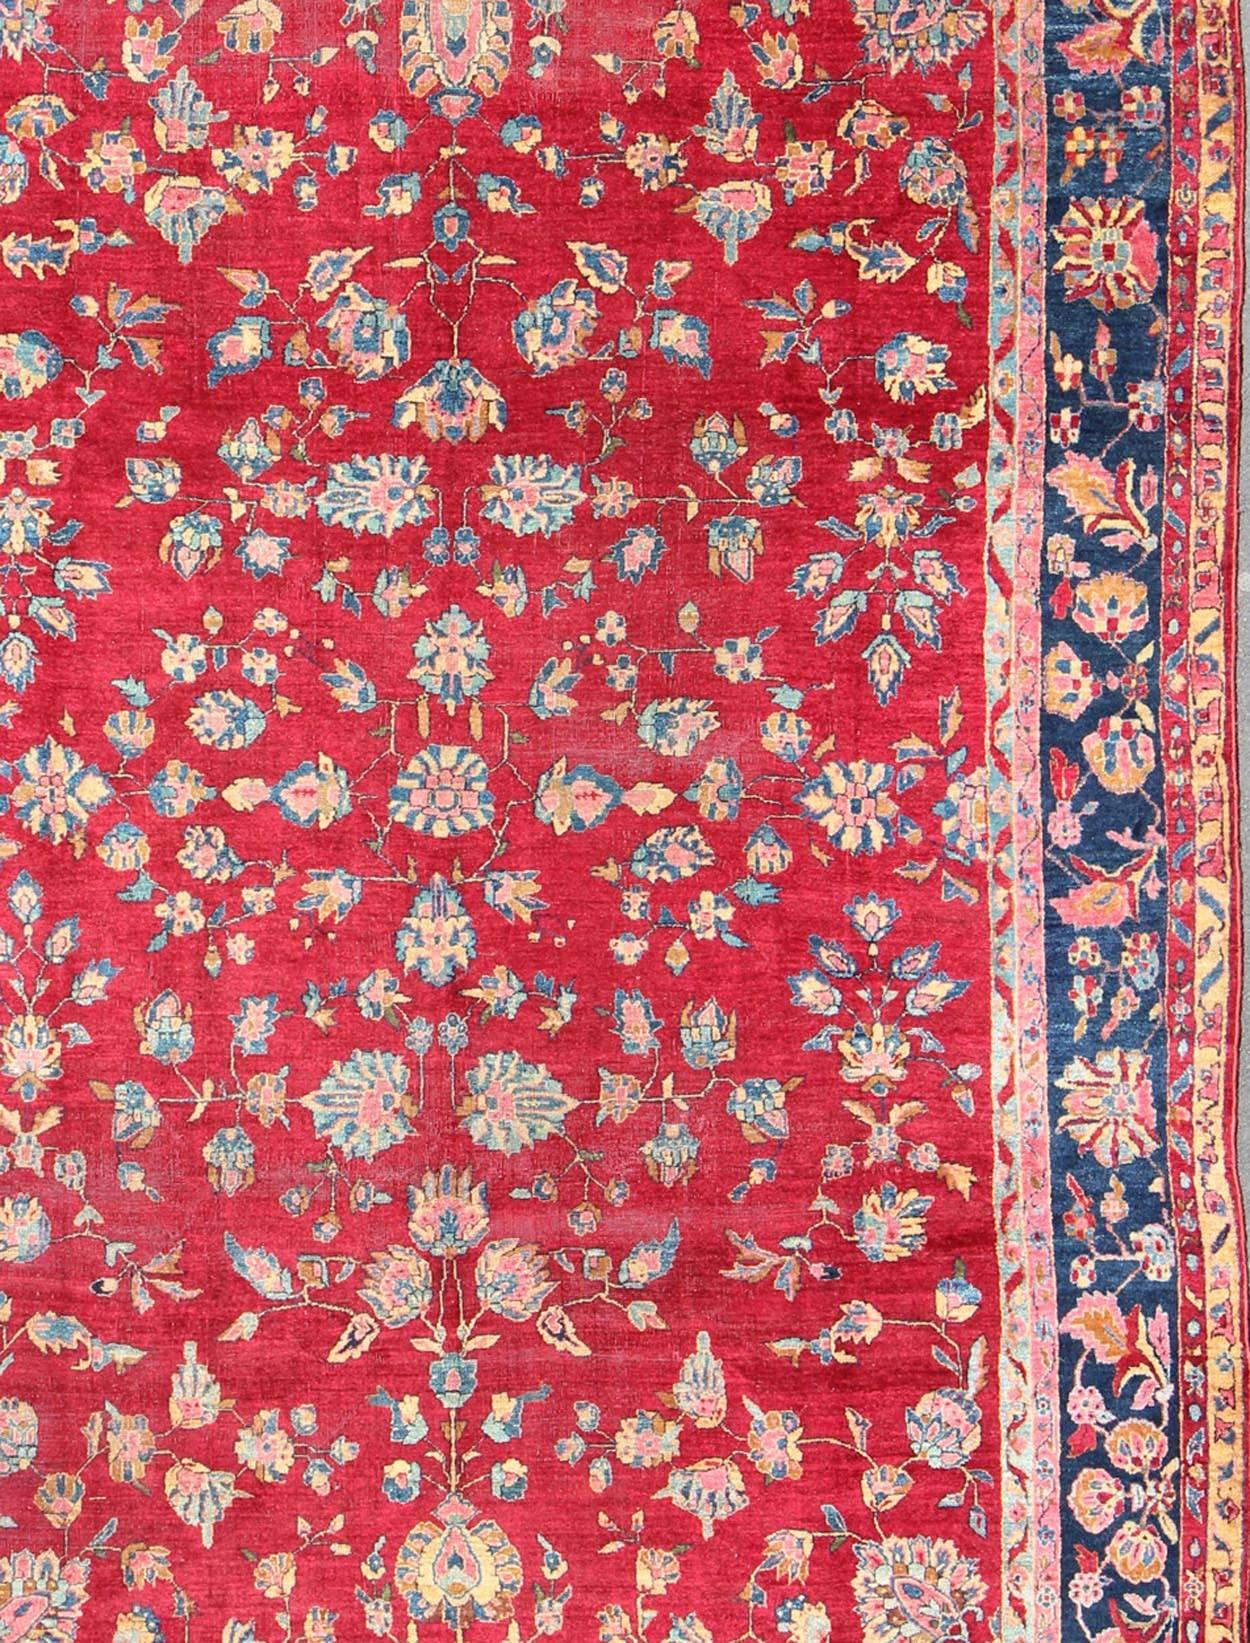 Hand-Knotted All-Over Floral Design Antique Indian Amritsar Rug in Red and Blue Tones For Sale